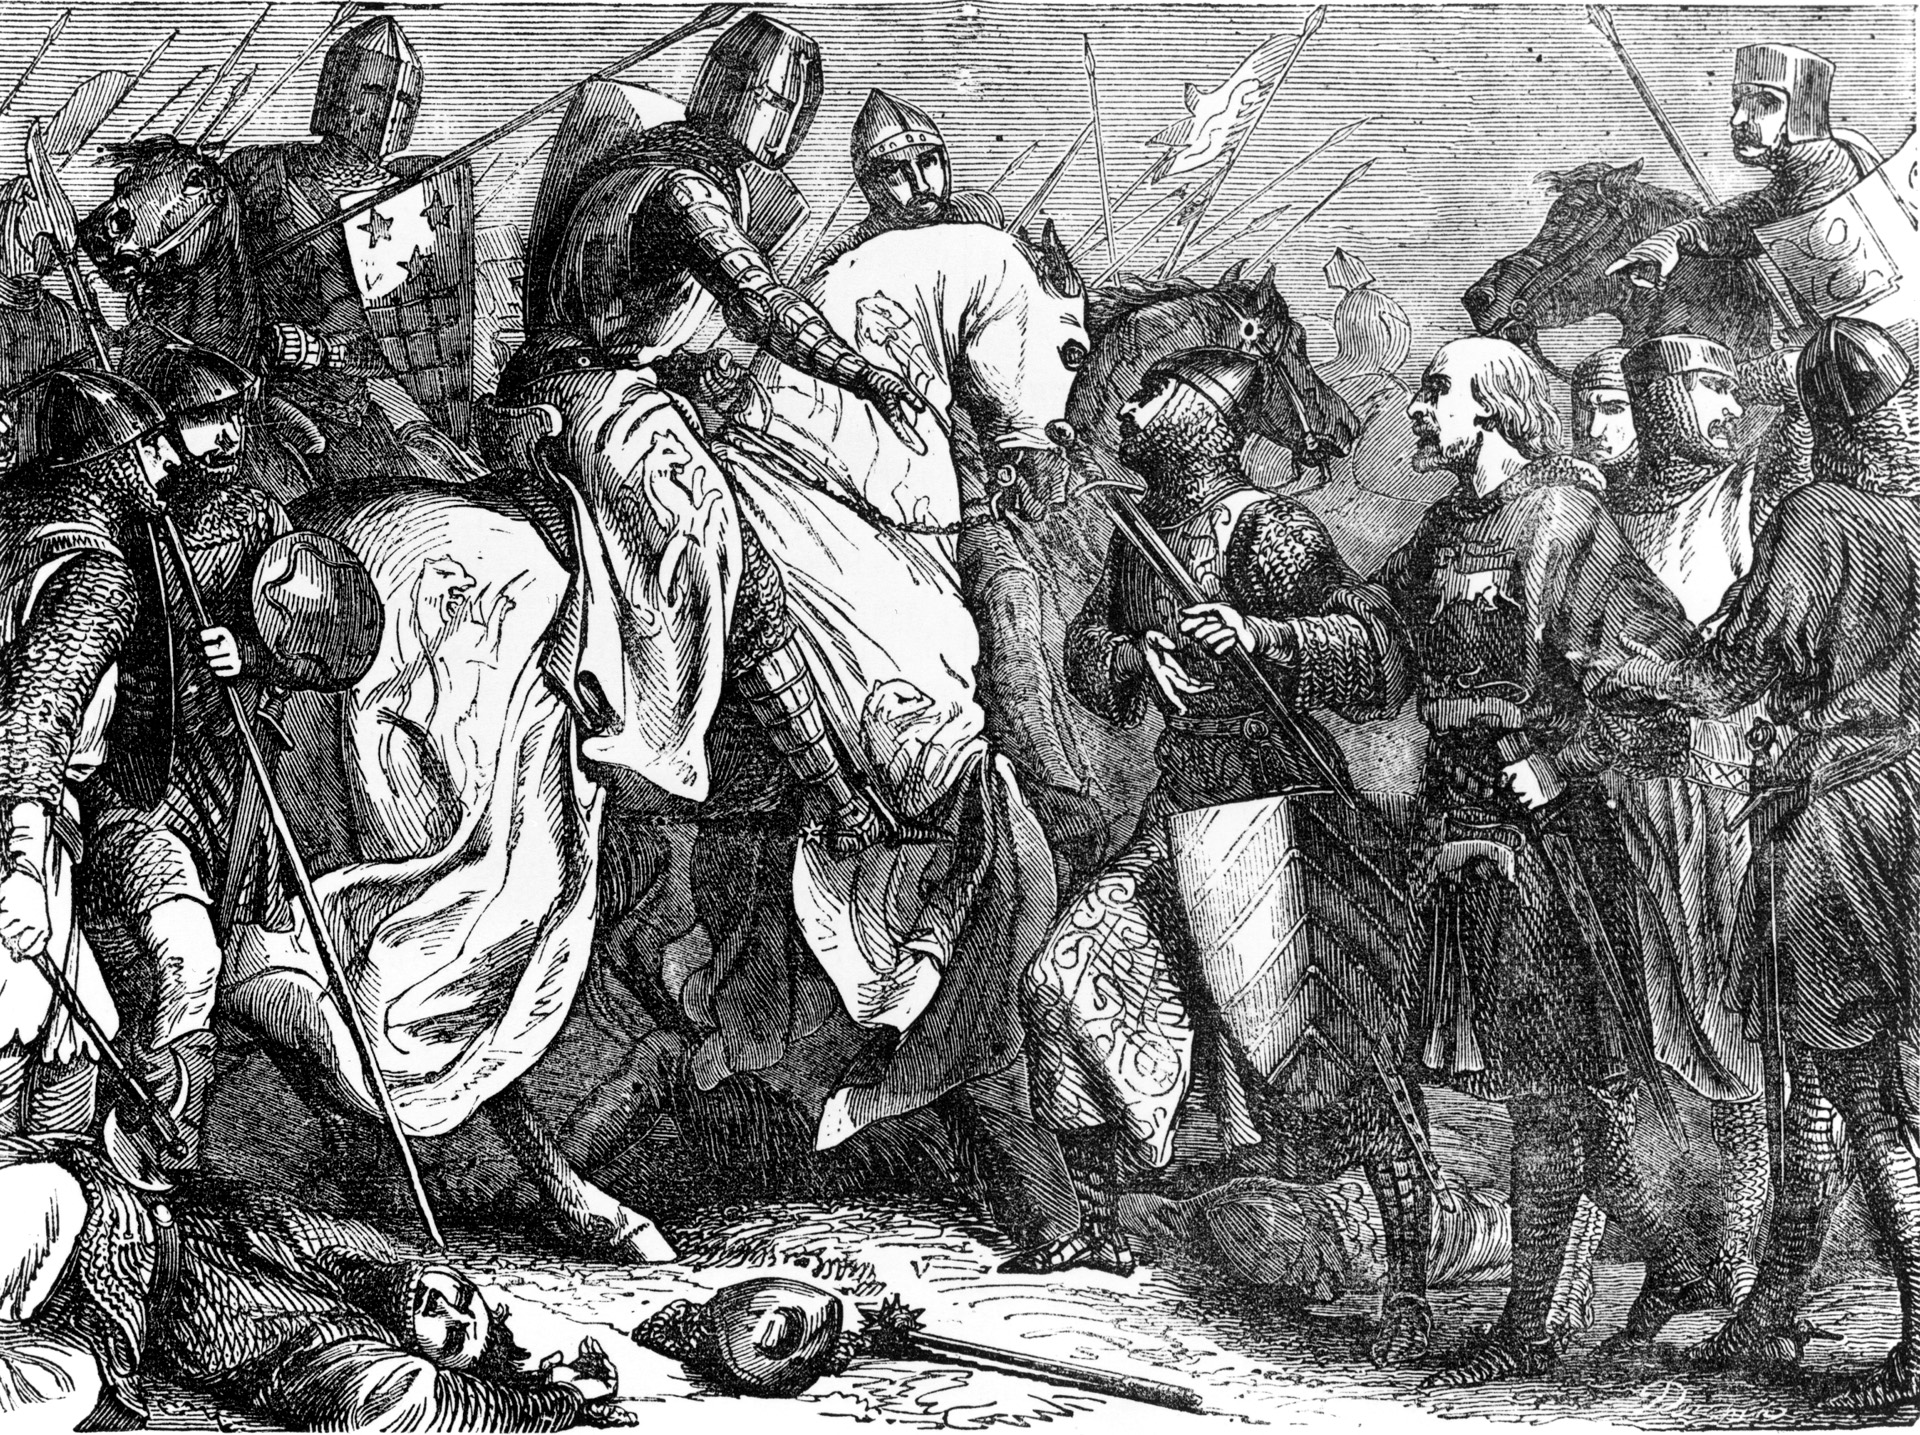 King Henry III surrenders his sword to Simon on the battlefield of Lewes. Simon took Henry and Edward prisoner but made a grave mistake allowing the pro-Royalist Welsh marcher lords to go free.